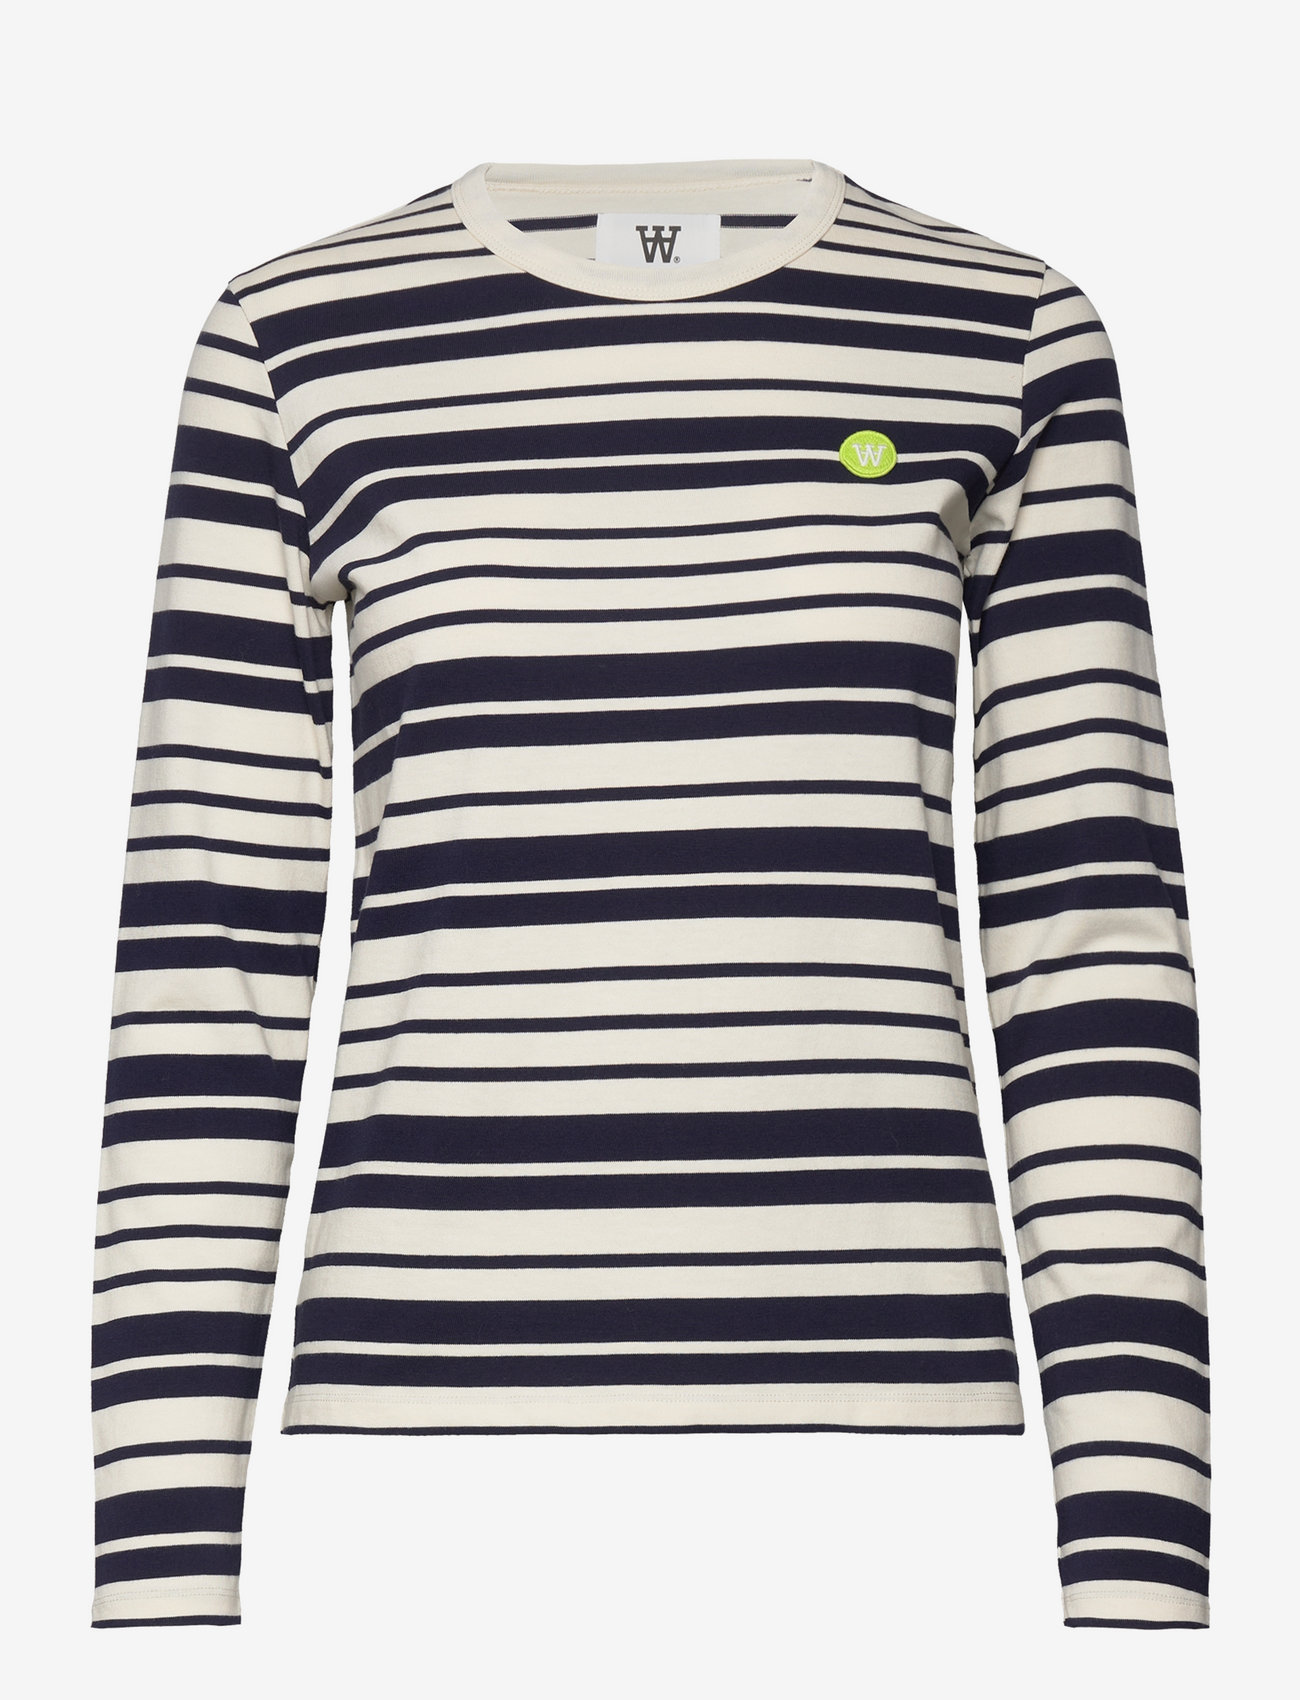 Double A by Wood Wood - Moa stripe long sleeve - t-shirts & tops - off-white/navy stripes - 0